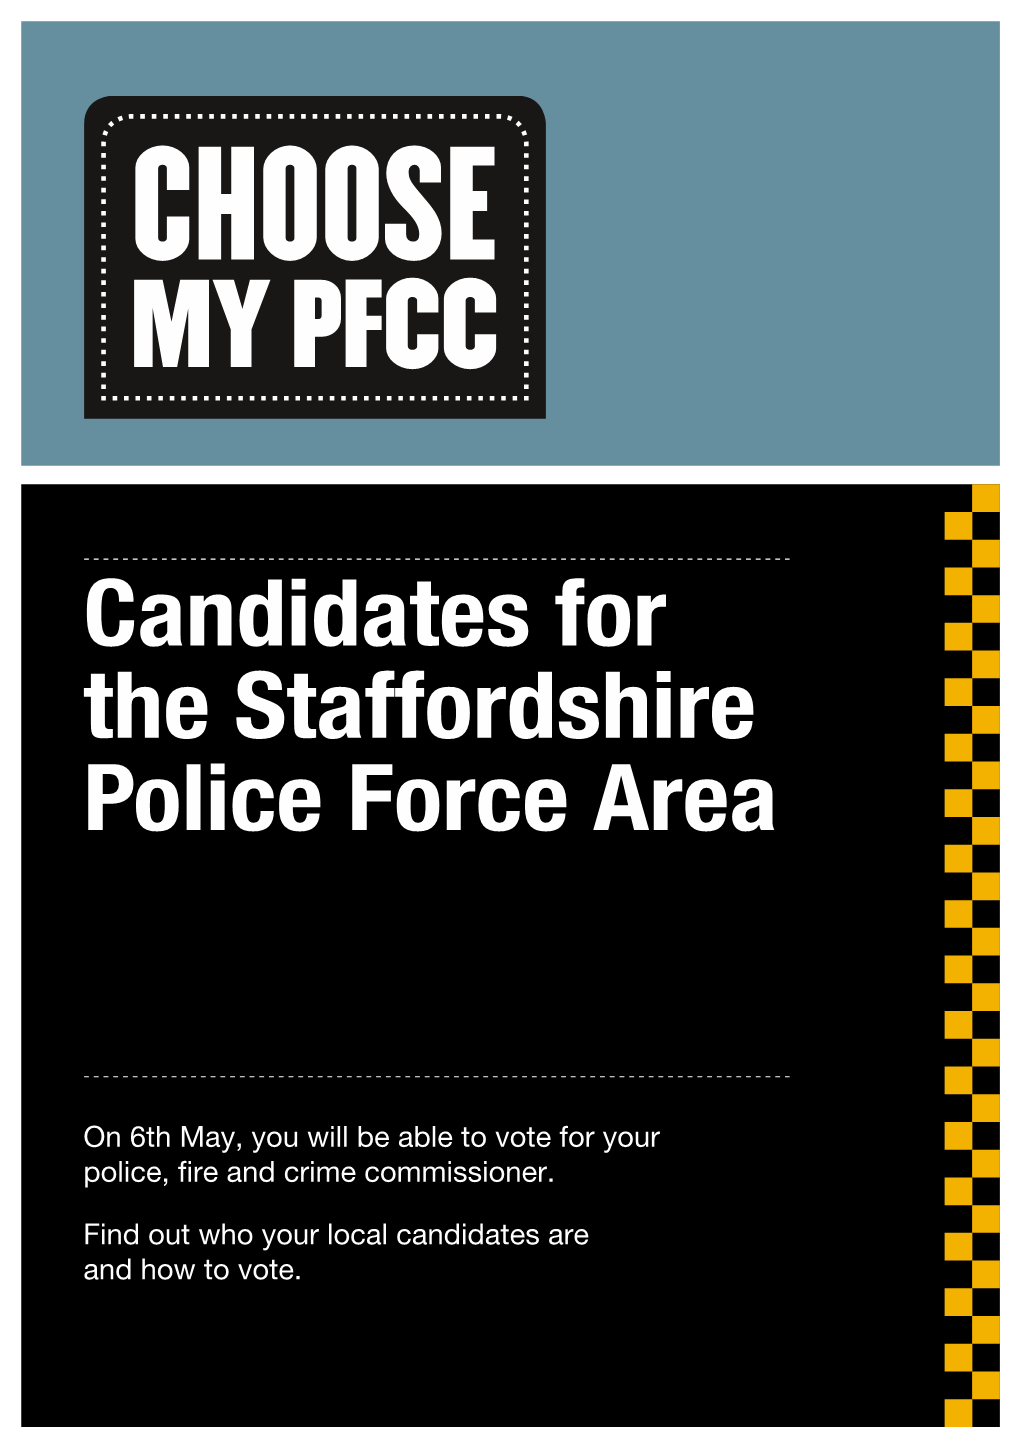 Candidates for the Staffordshire Police Force Area